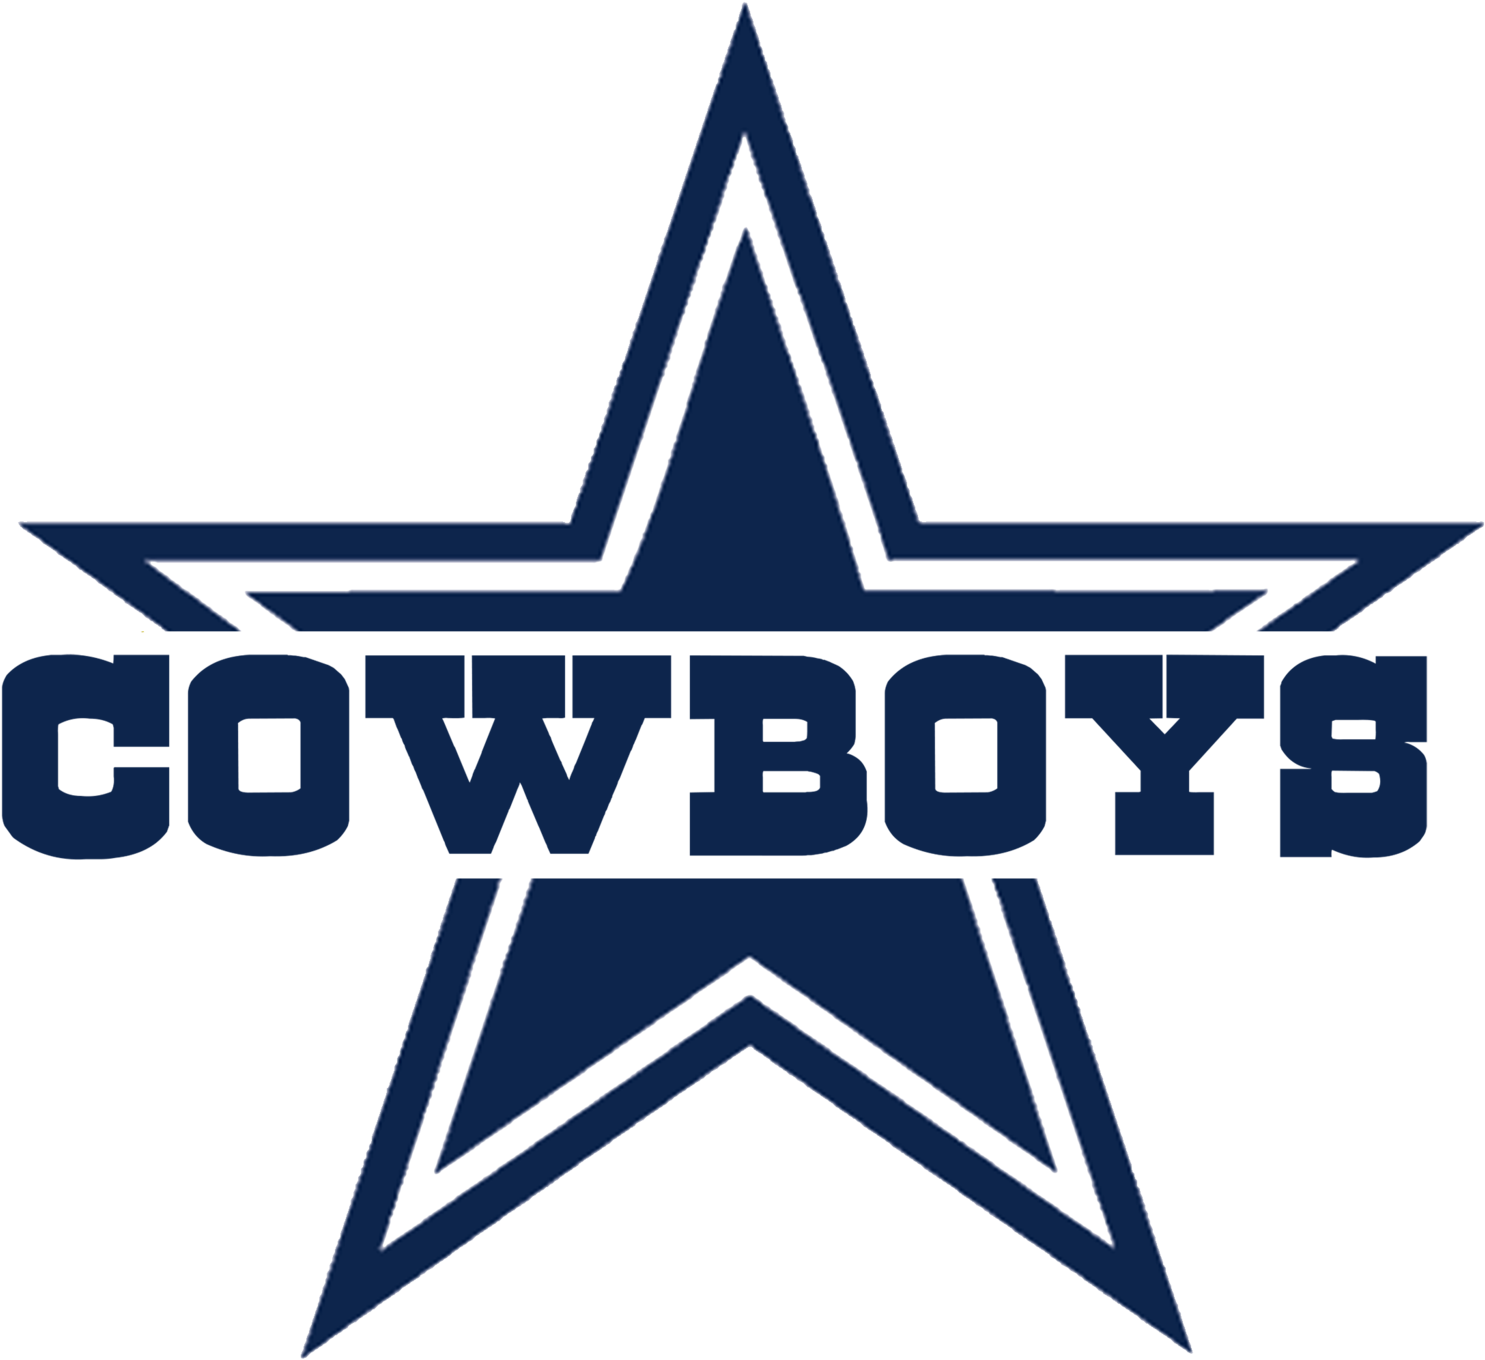 texas, stars, cowboy png images online